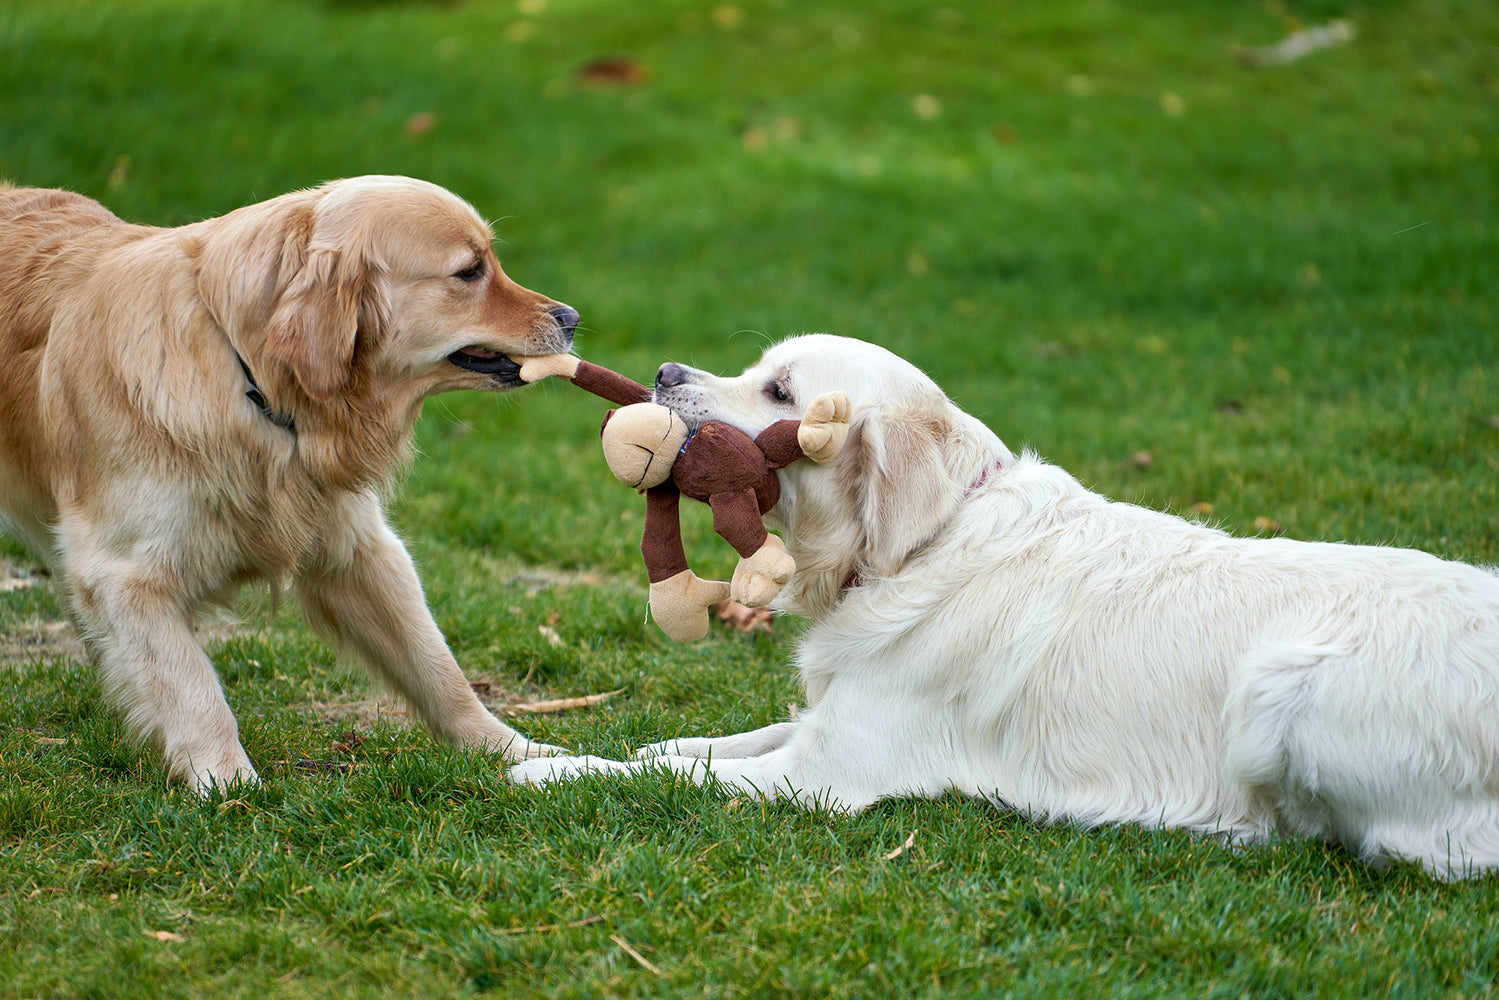 Decoding Dog Body Language: How Dogs Communicate with Humans and Each Other